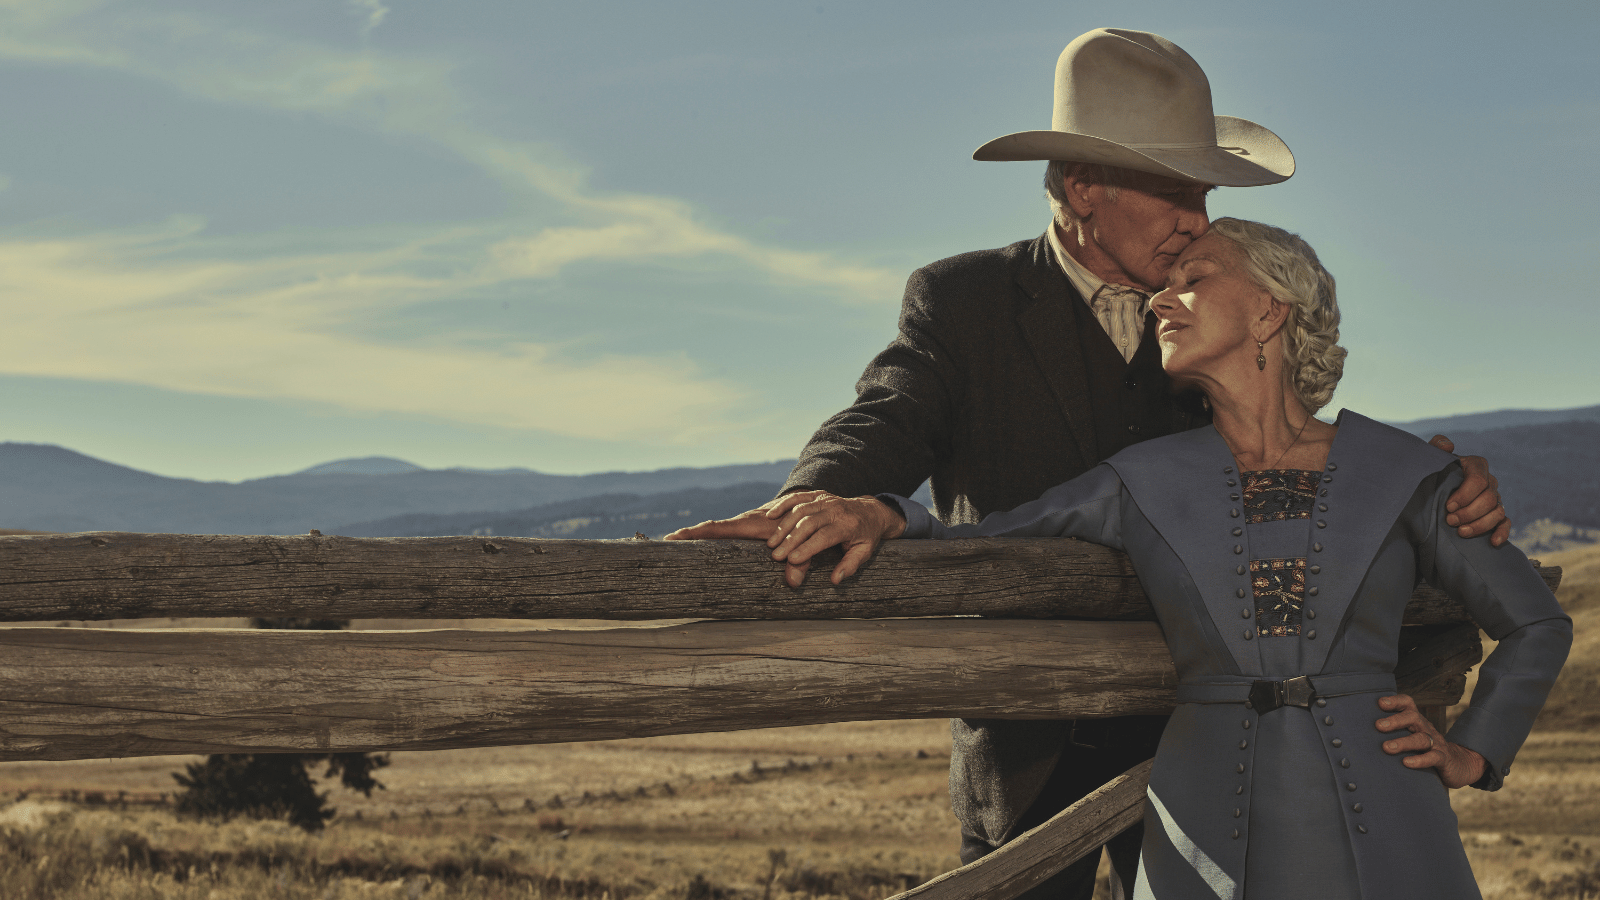 Latest ‘Yellowstone’ News: Brandon Sklenar talks about Rip and Beth comparisons on ‘1923’ as Taylor Sheridan pinpoints the reason he focused on this branch of the Dutton family tree